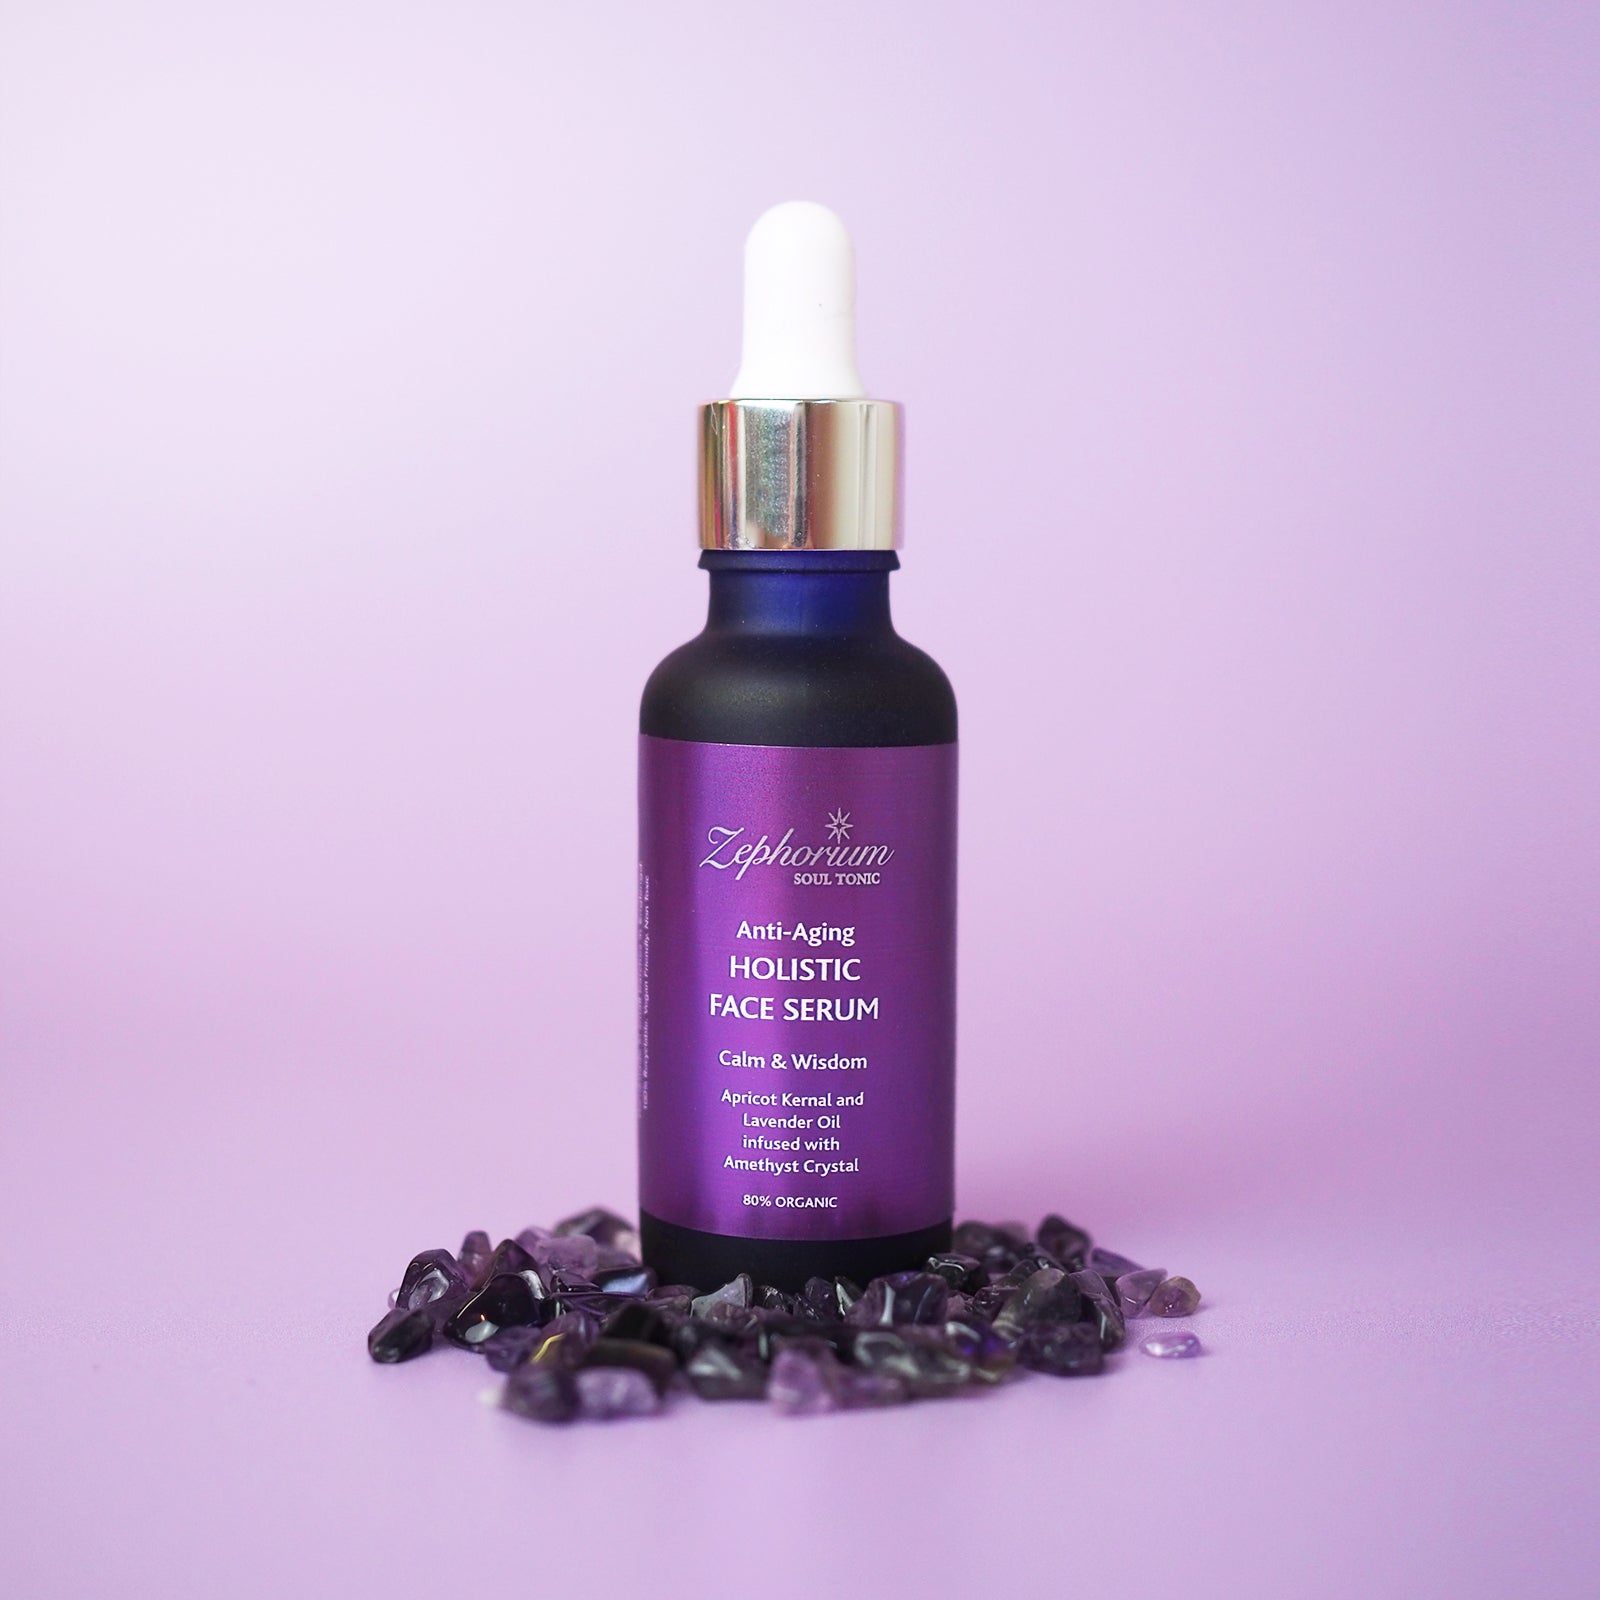 Anti-Aging Facial Serum with Apricot Kernel and Amethyst Crystal